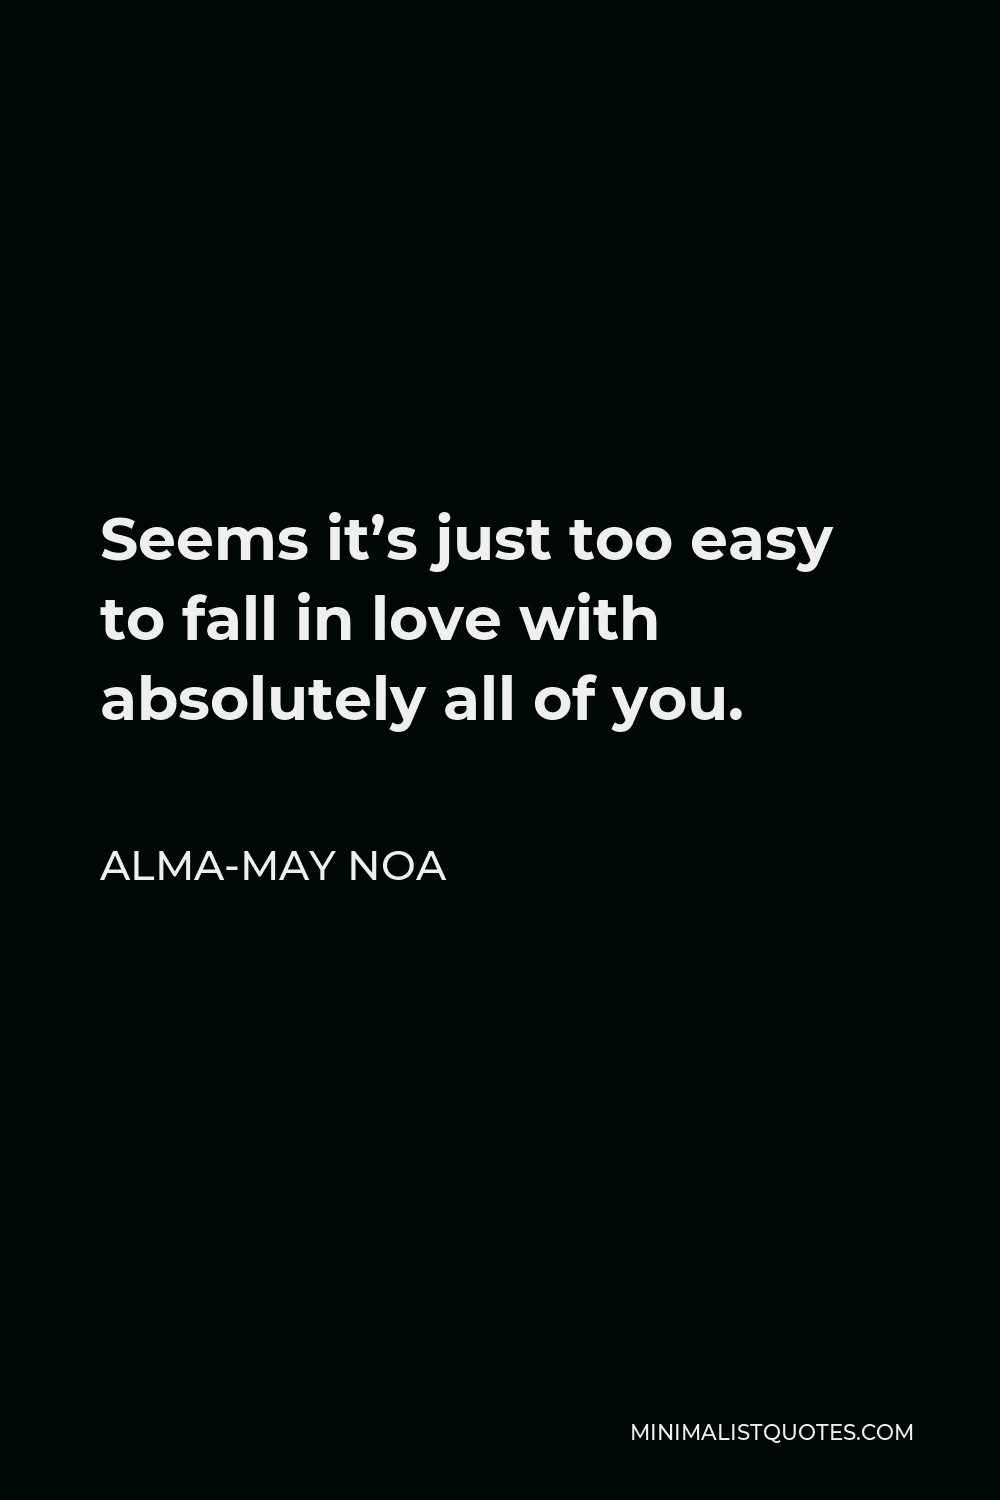 Alma-May Noa Quote - Seems it’s just too easy to fall in love with absolutely all of you.